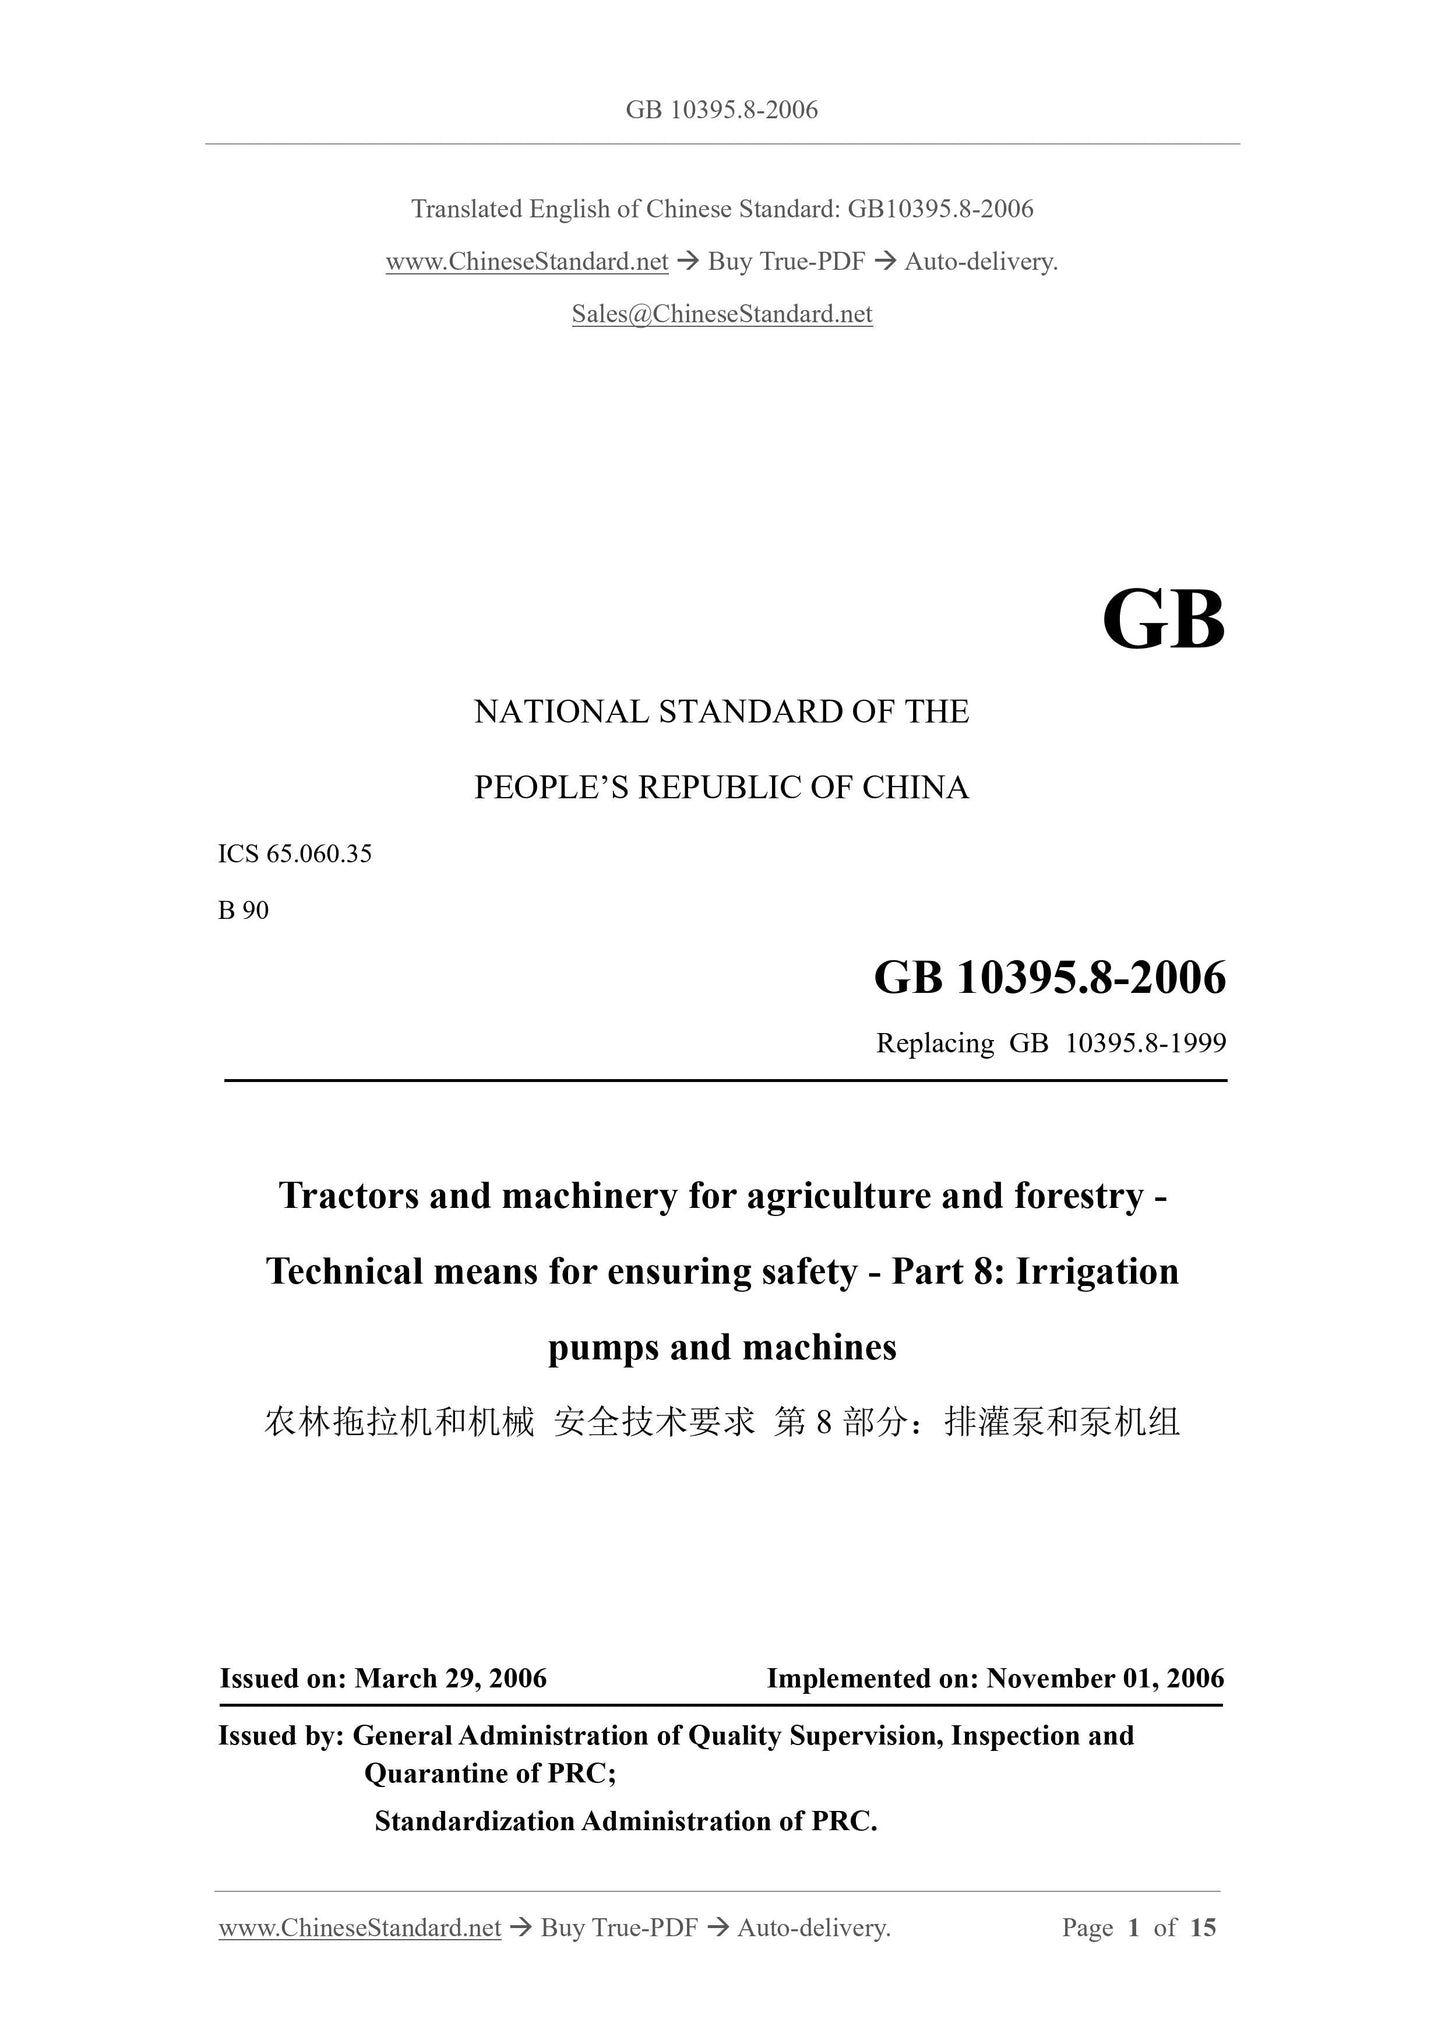 GB 10395.8-2006 Page 1